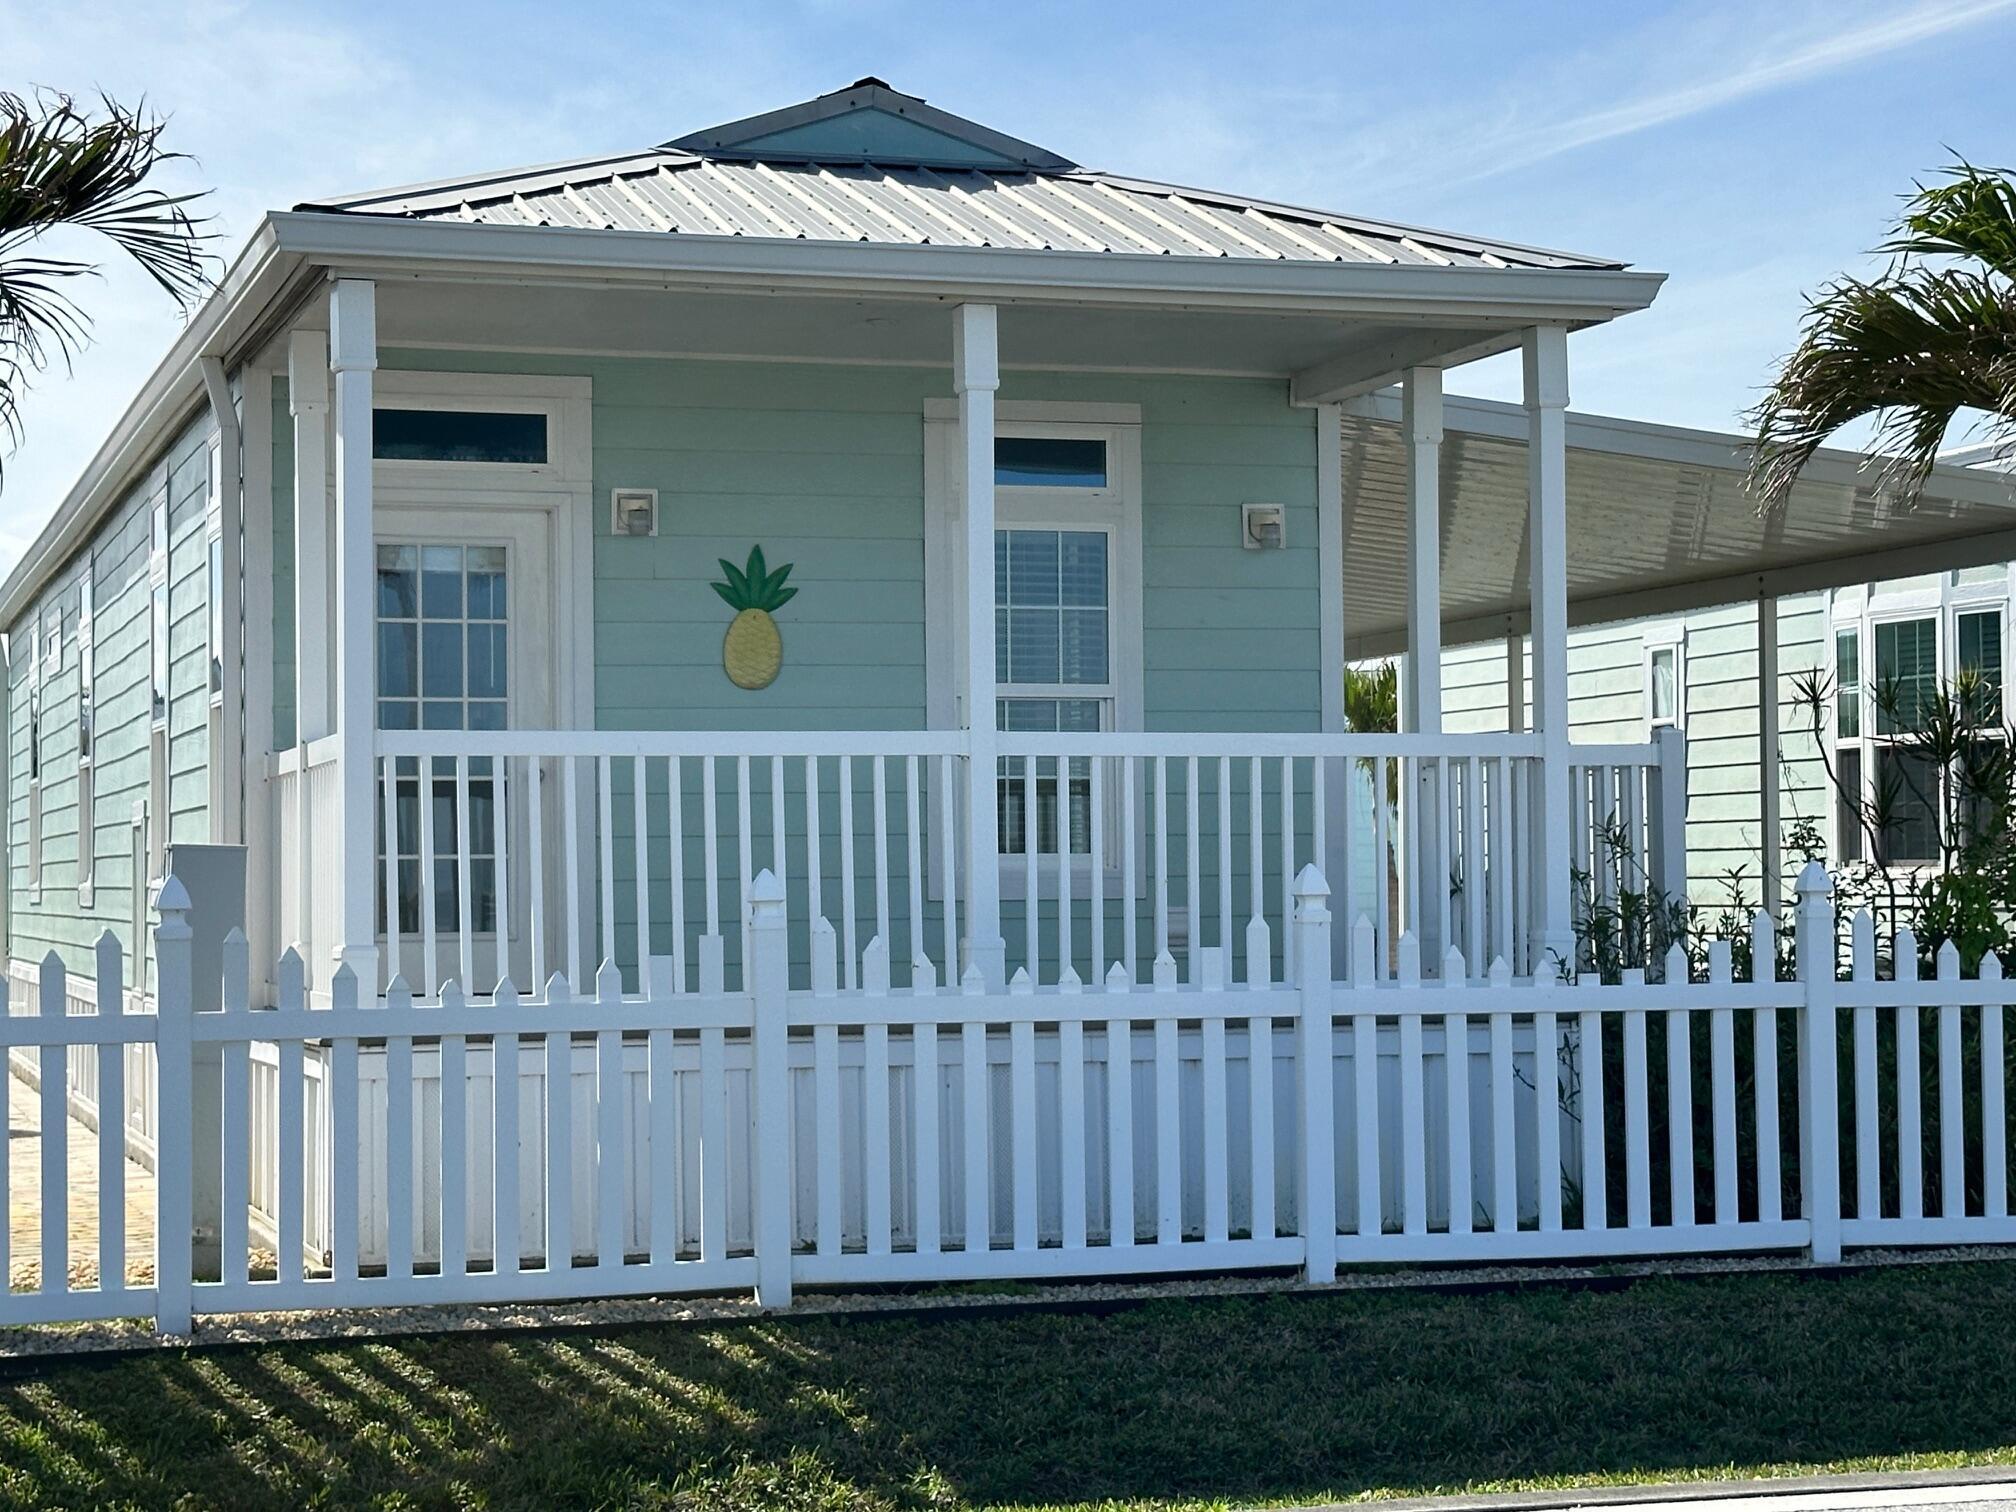 Let the vacation begin! Located in the 55+ Ocean Breeze Resort overlooking beautiful wide water views of the Indian River right off your front porch!. This 2015 built manufactured home boasts impact windows, light & bright rooms with that fabulous water view! A storage shed for all your beach toys but you may never want to leave with all the resort amenities on the property. Walk or cruise over on your golf cart to the clubhouse for dinners, games, live music, dancing and more! Heated pool, hot tub, pickleball, Cafe/Bar, gym, sauna, bocce ball and a dog park for your furry friends. Fishing pier with paddleboard & kayak launch. Downtown Jensen is a short walk to your favorite shops and restaurants...and the ocean beaches are just a 2 mile stone's throw...Live your best life right here!